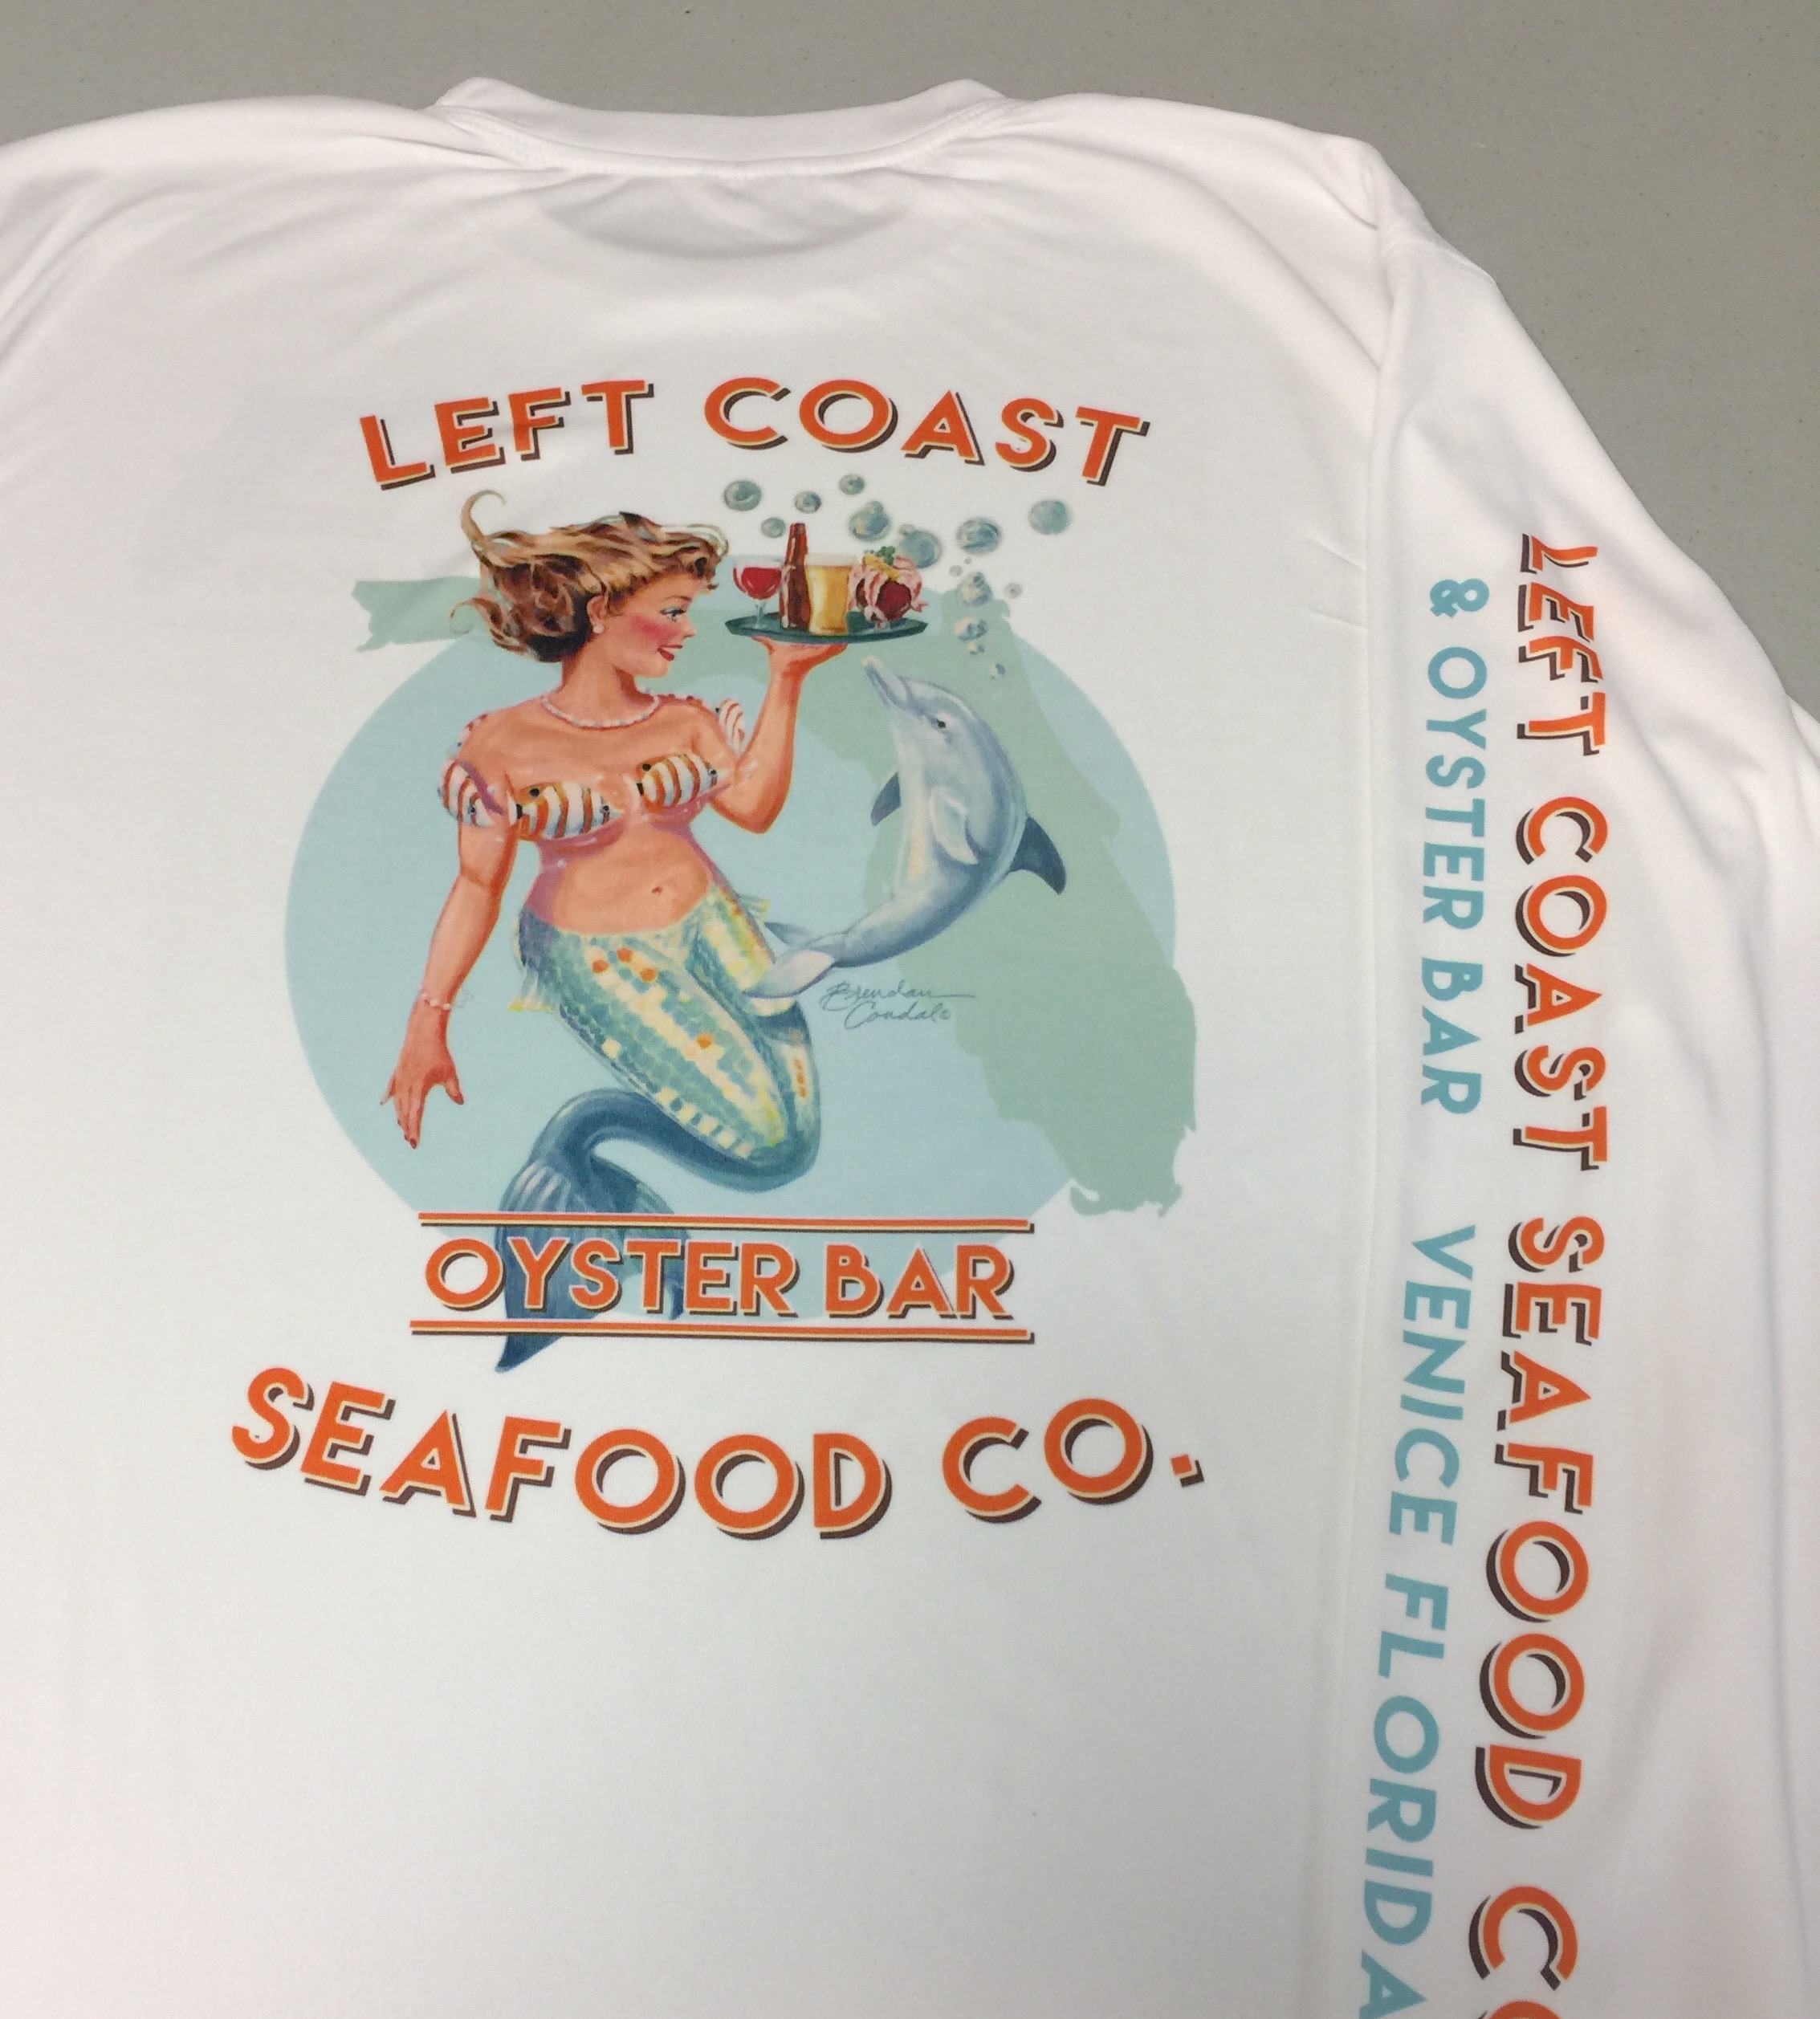 Left Coast made with sublimation printing